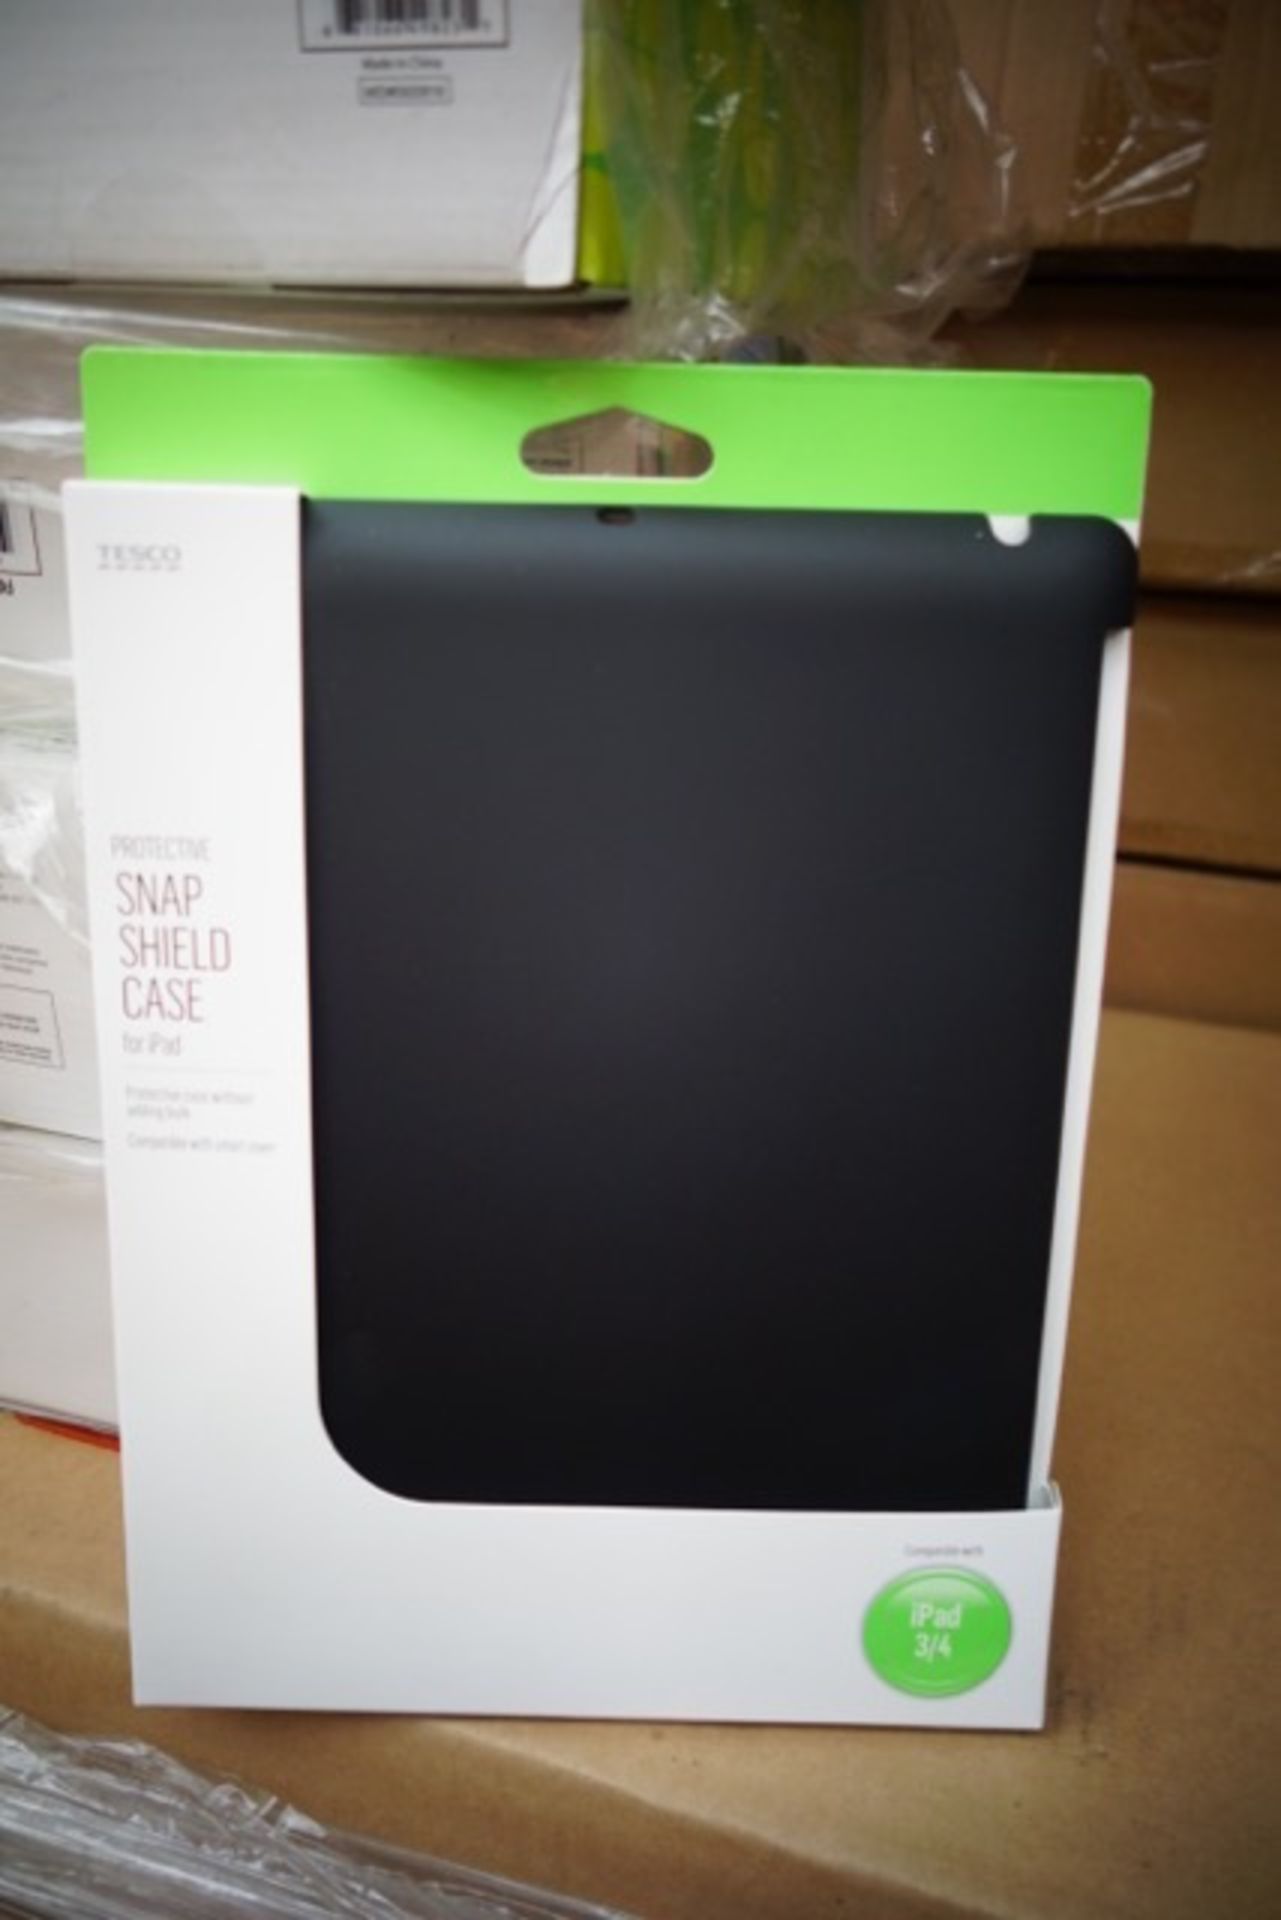 72 x Brand New Protective Snap Shield Case for Ipad